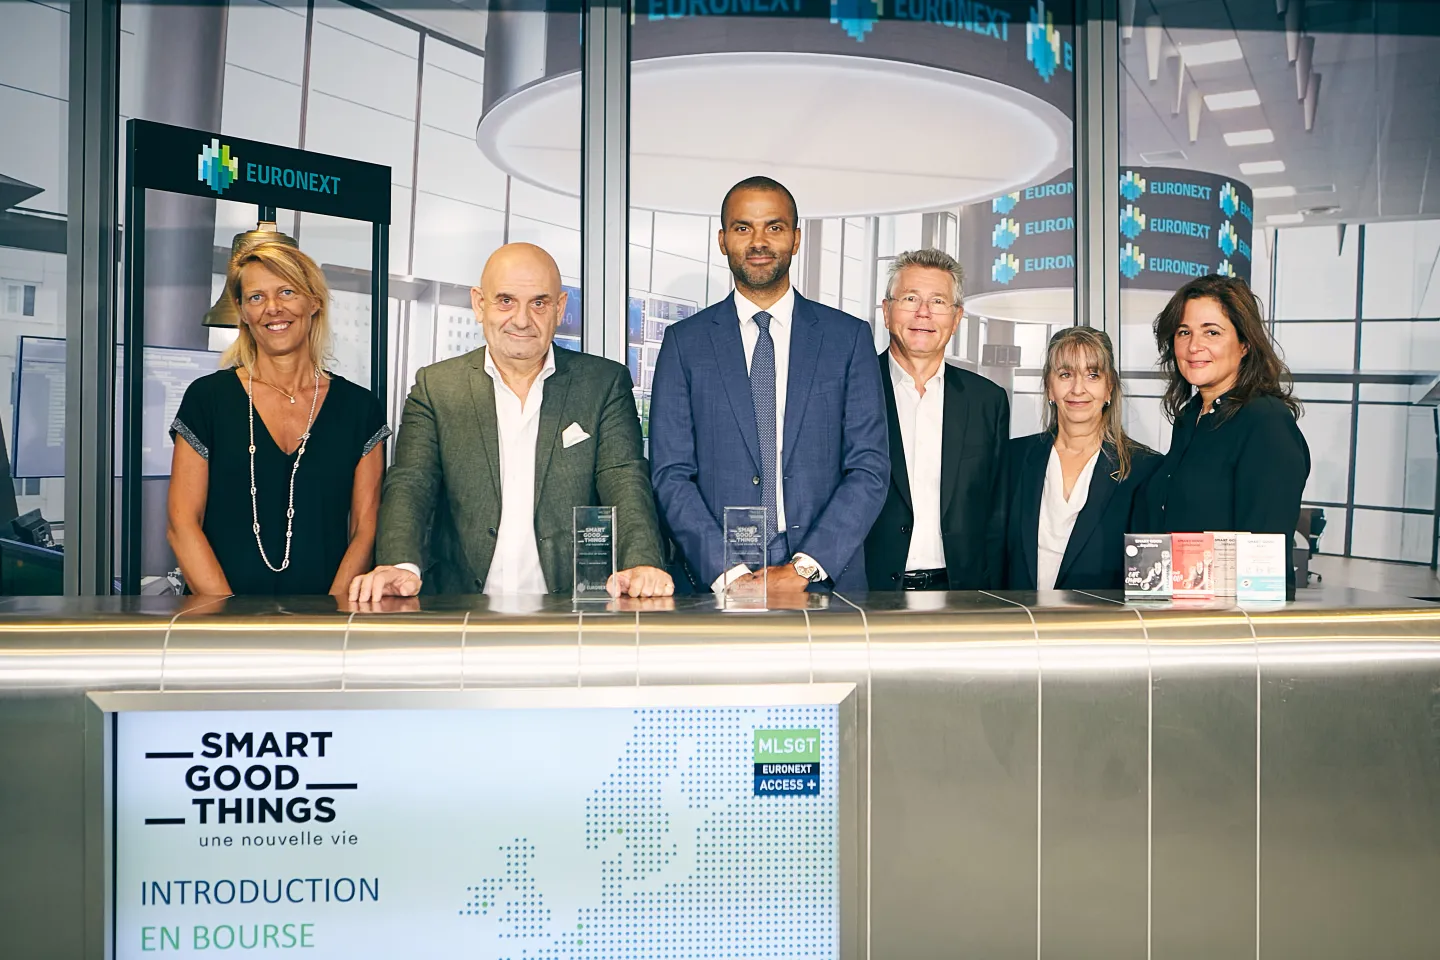 Smart Good Things - Euronext Access +